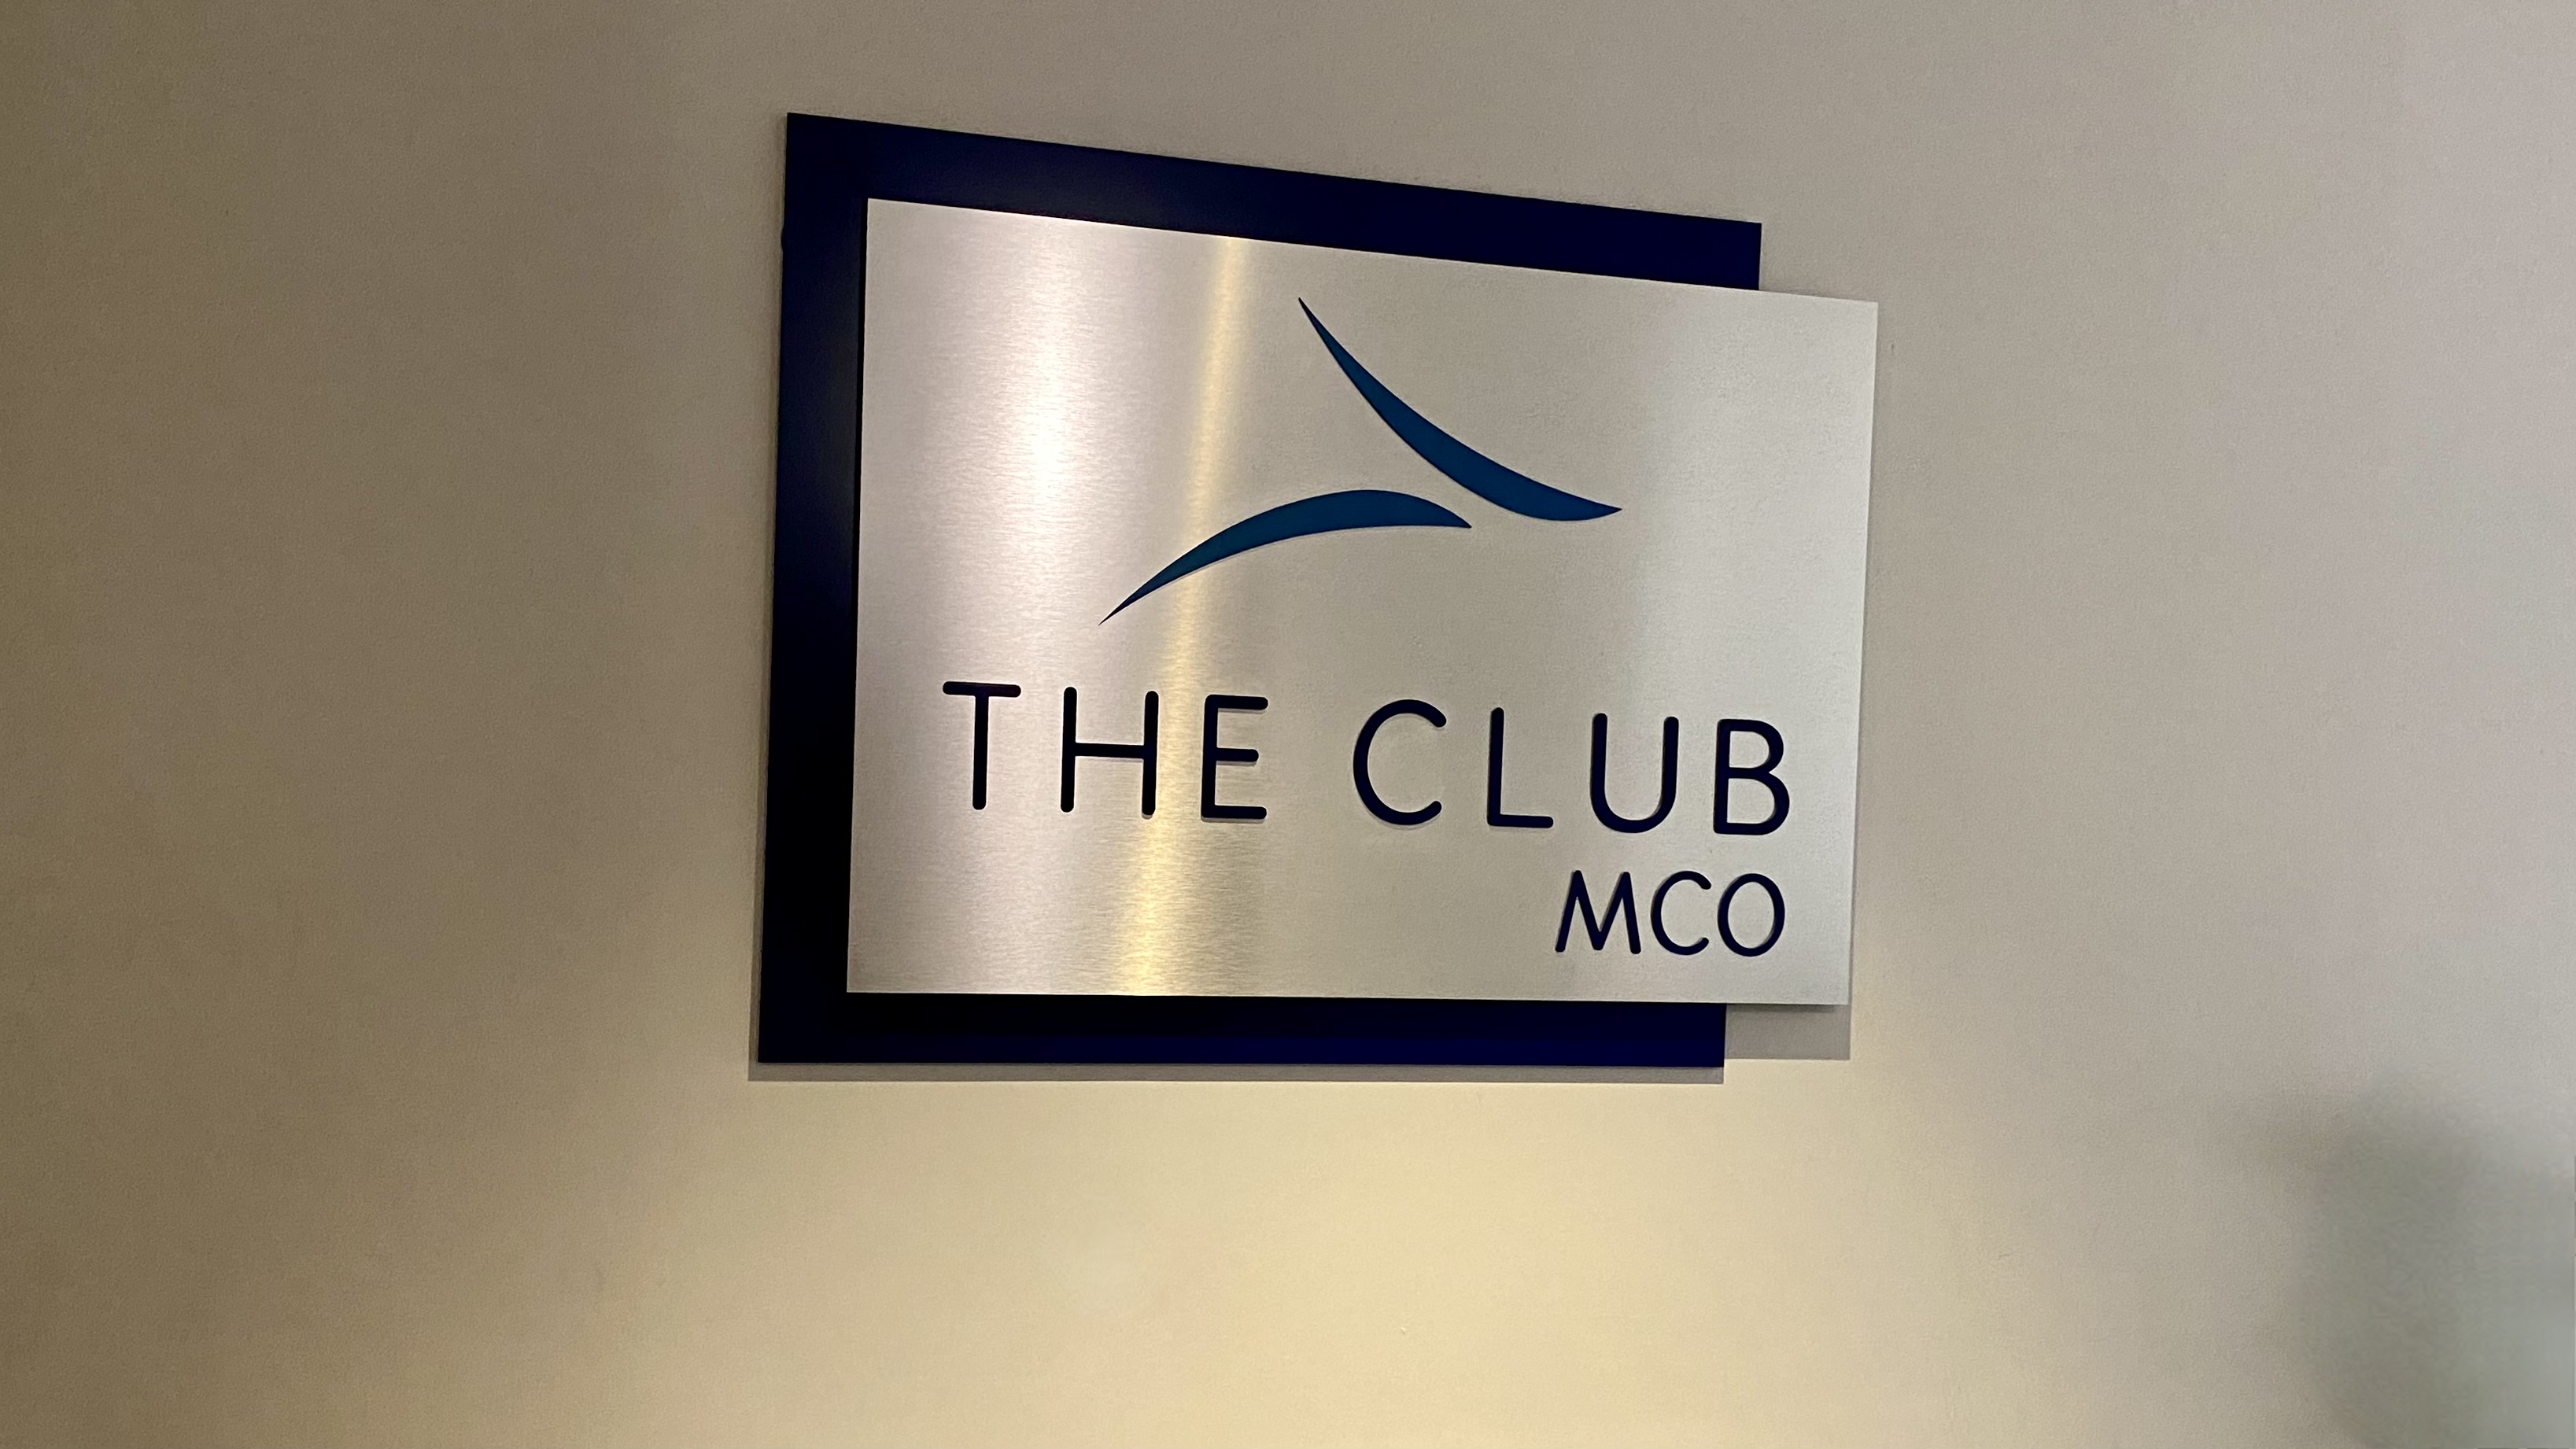 The Club Airport Lounges Now Offer Food To Order & It Needs Work - Your ...